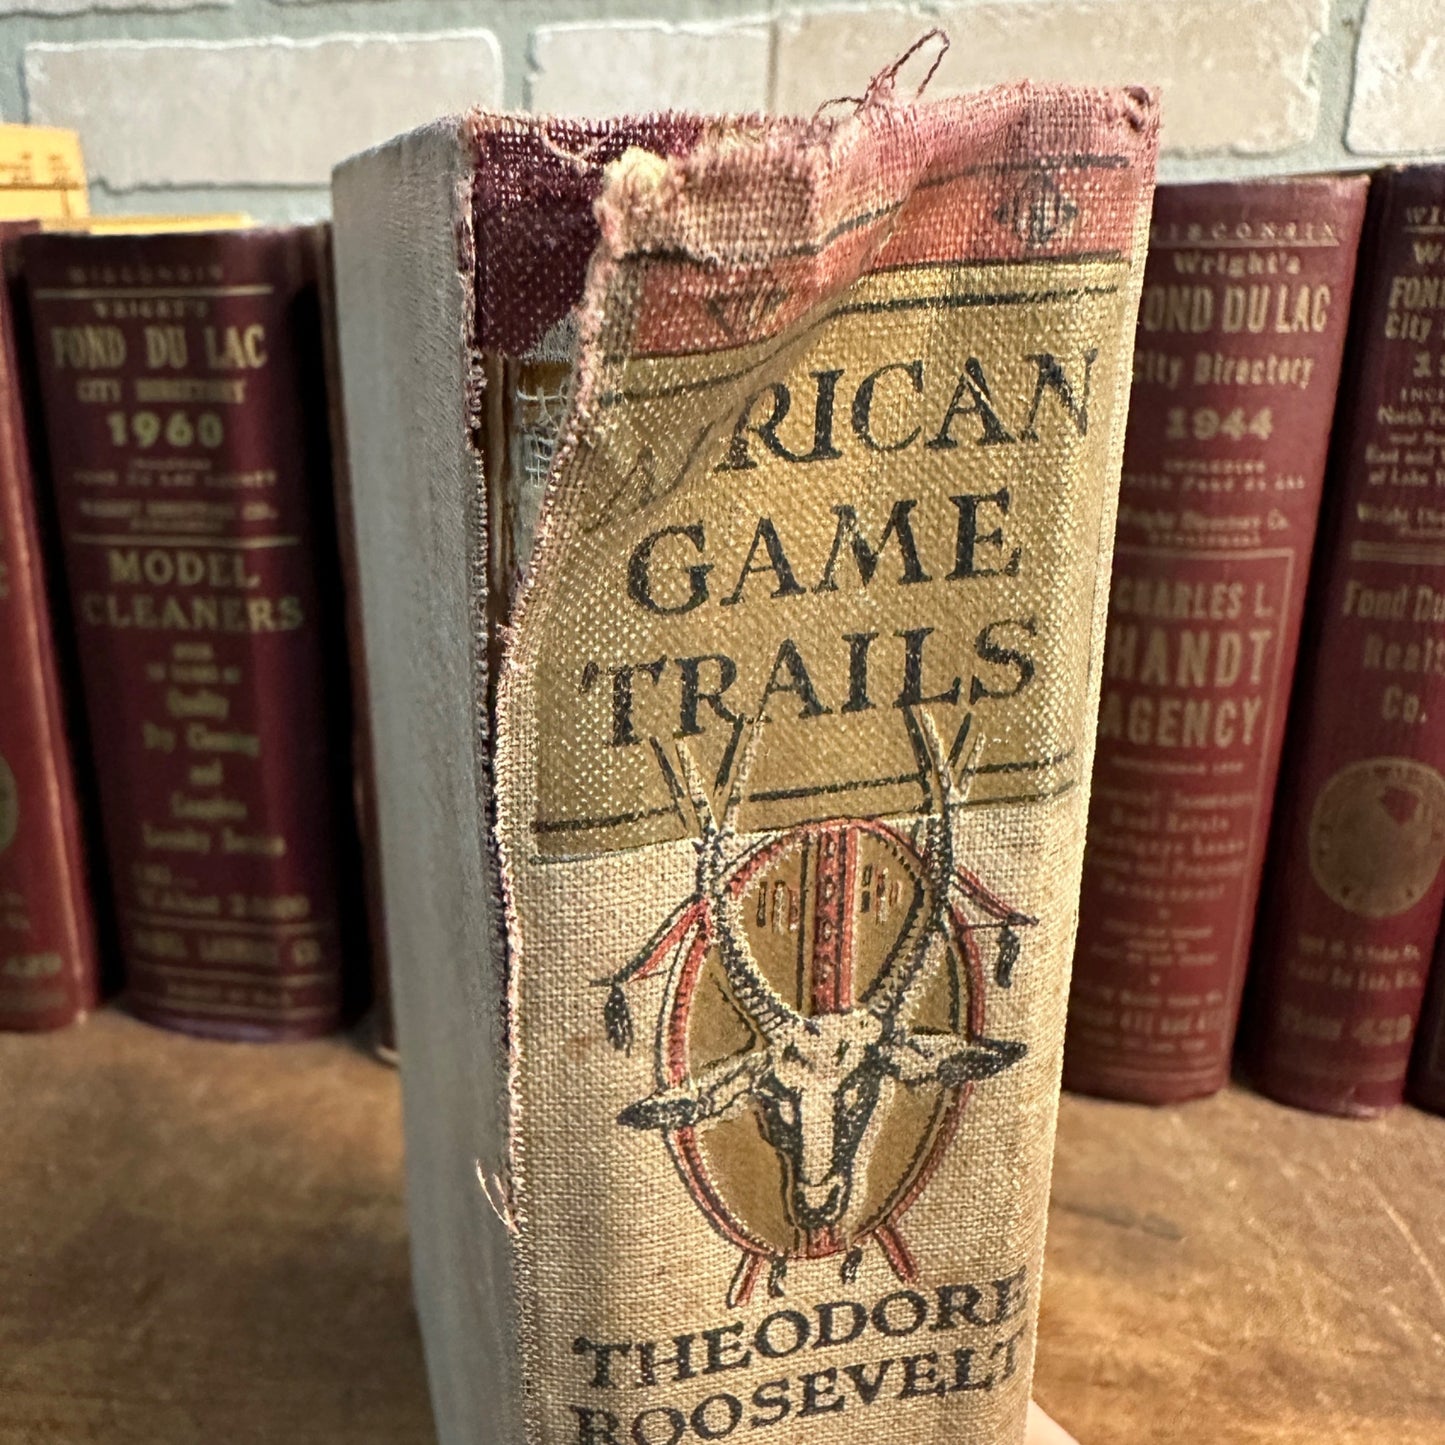 AFRICAN GAME TRAILS THEODORE ROOSEVELT 1910 BOOK SYNDICATE PUBLISHING